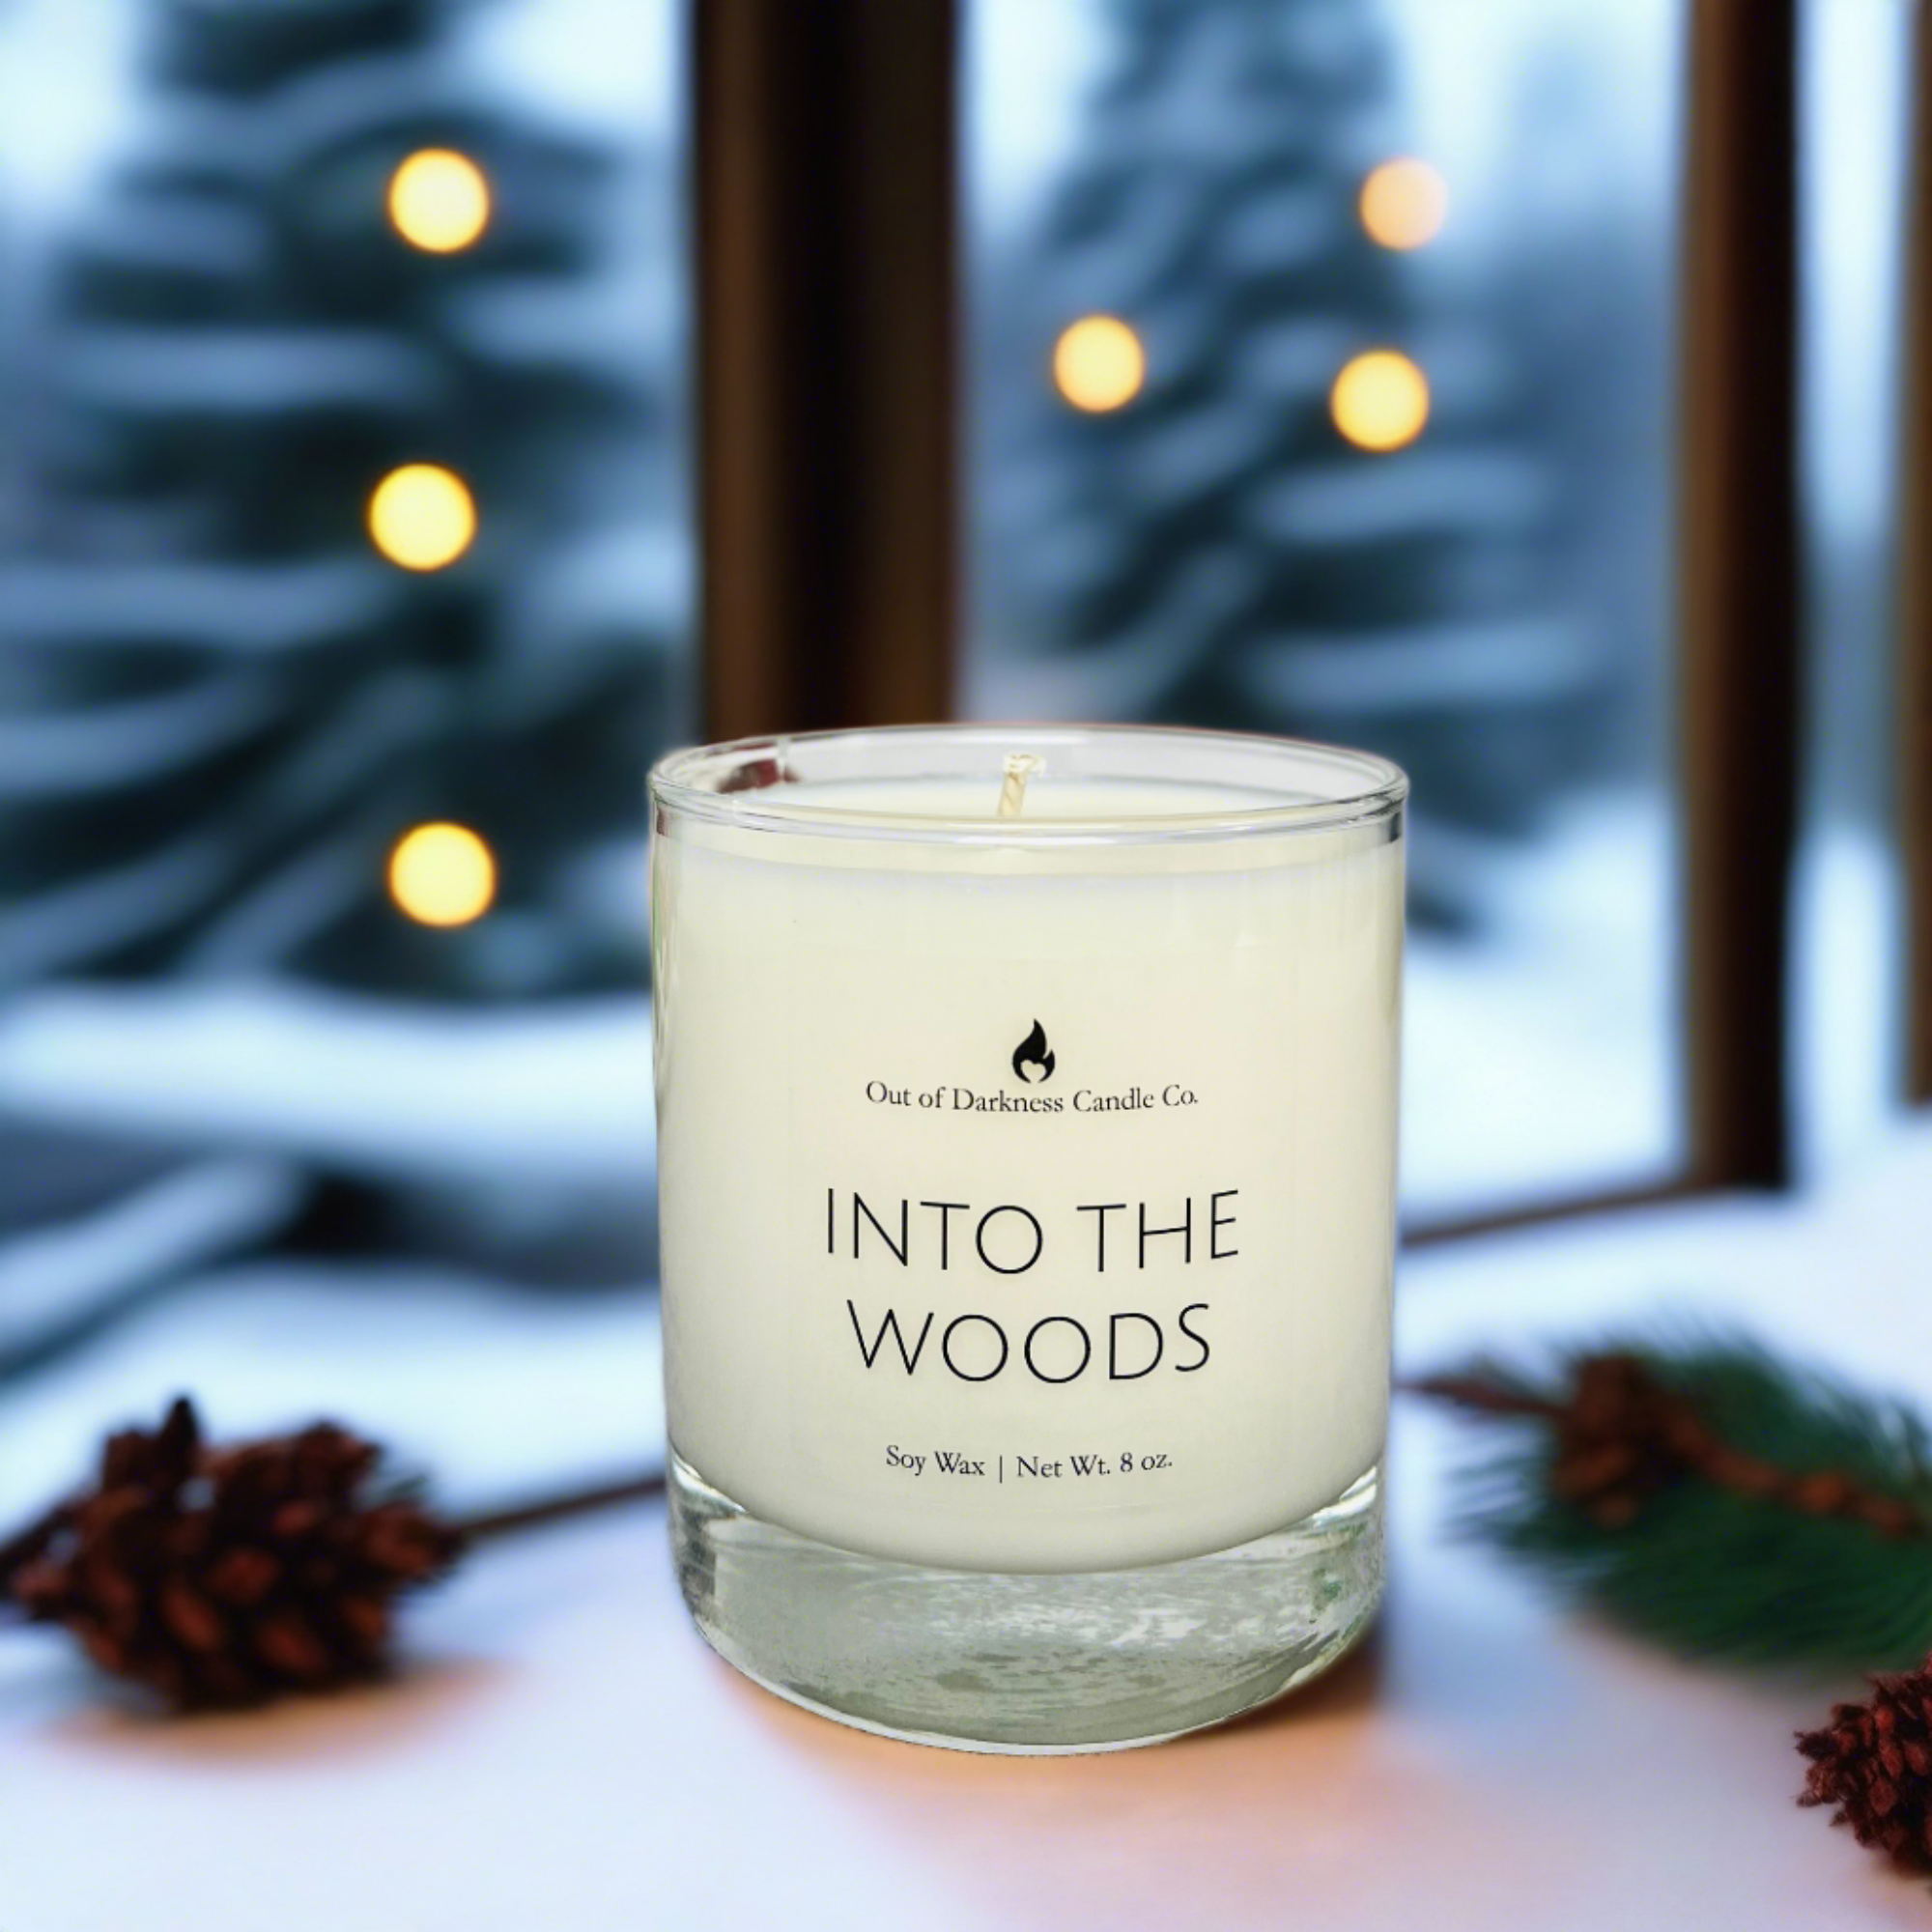 Fraser Fir / Woodland Wonders Handmade Candle - Quality in Mind Candles